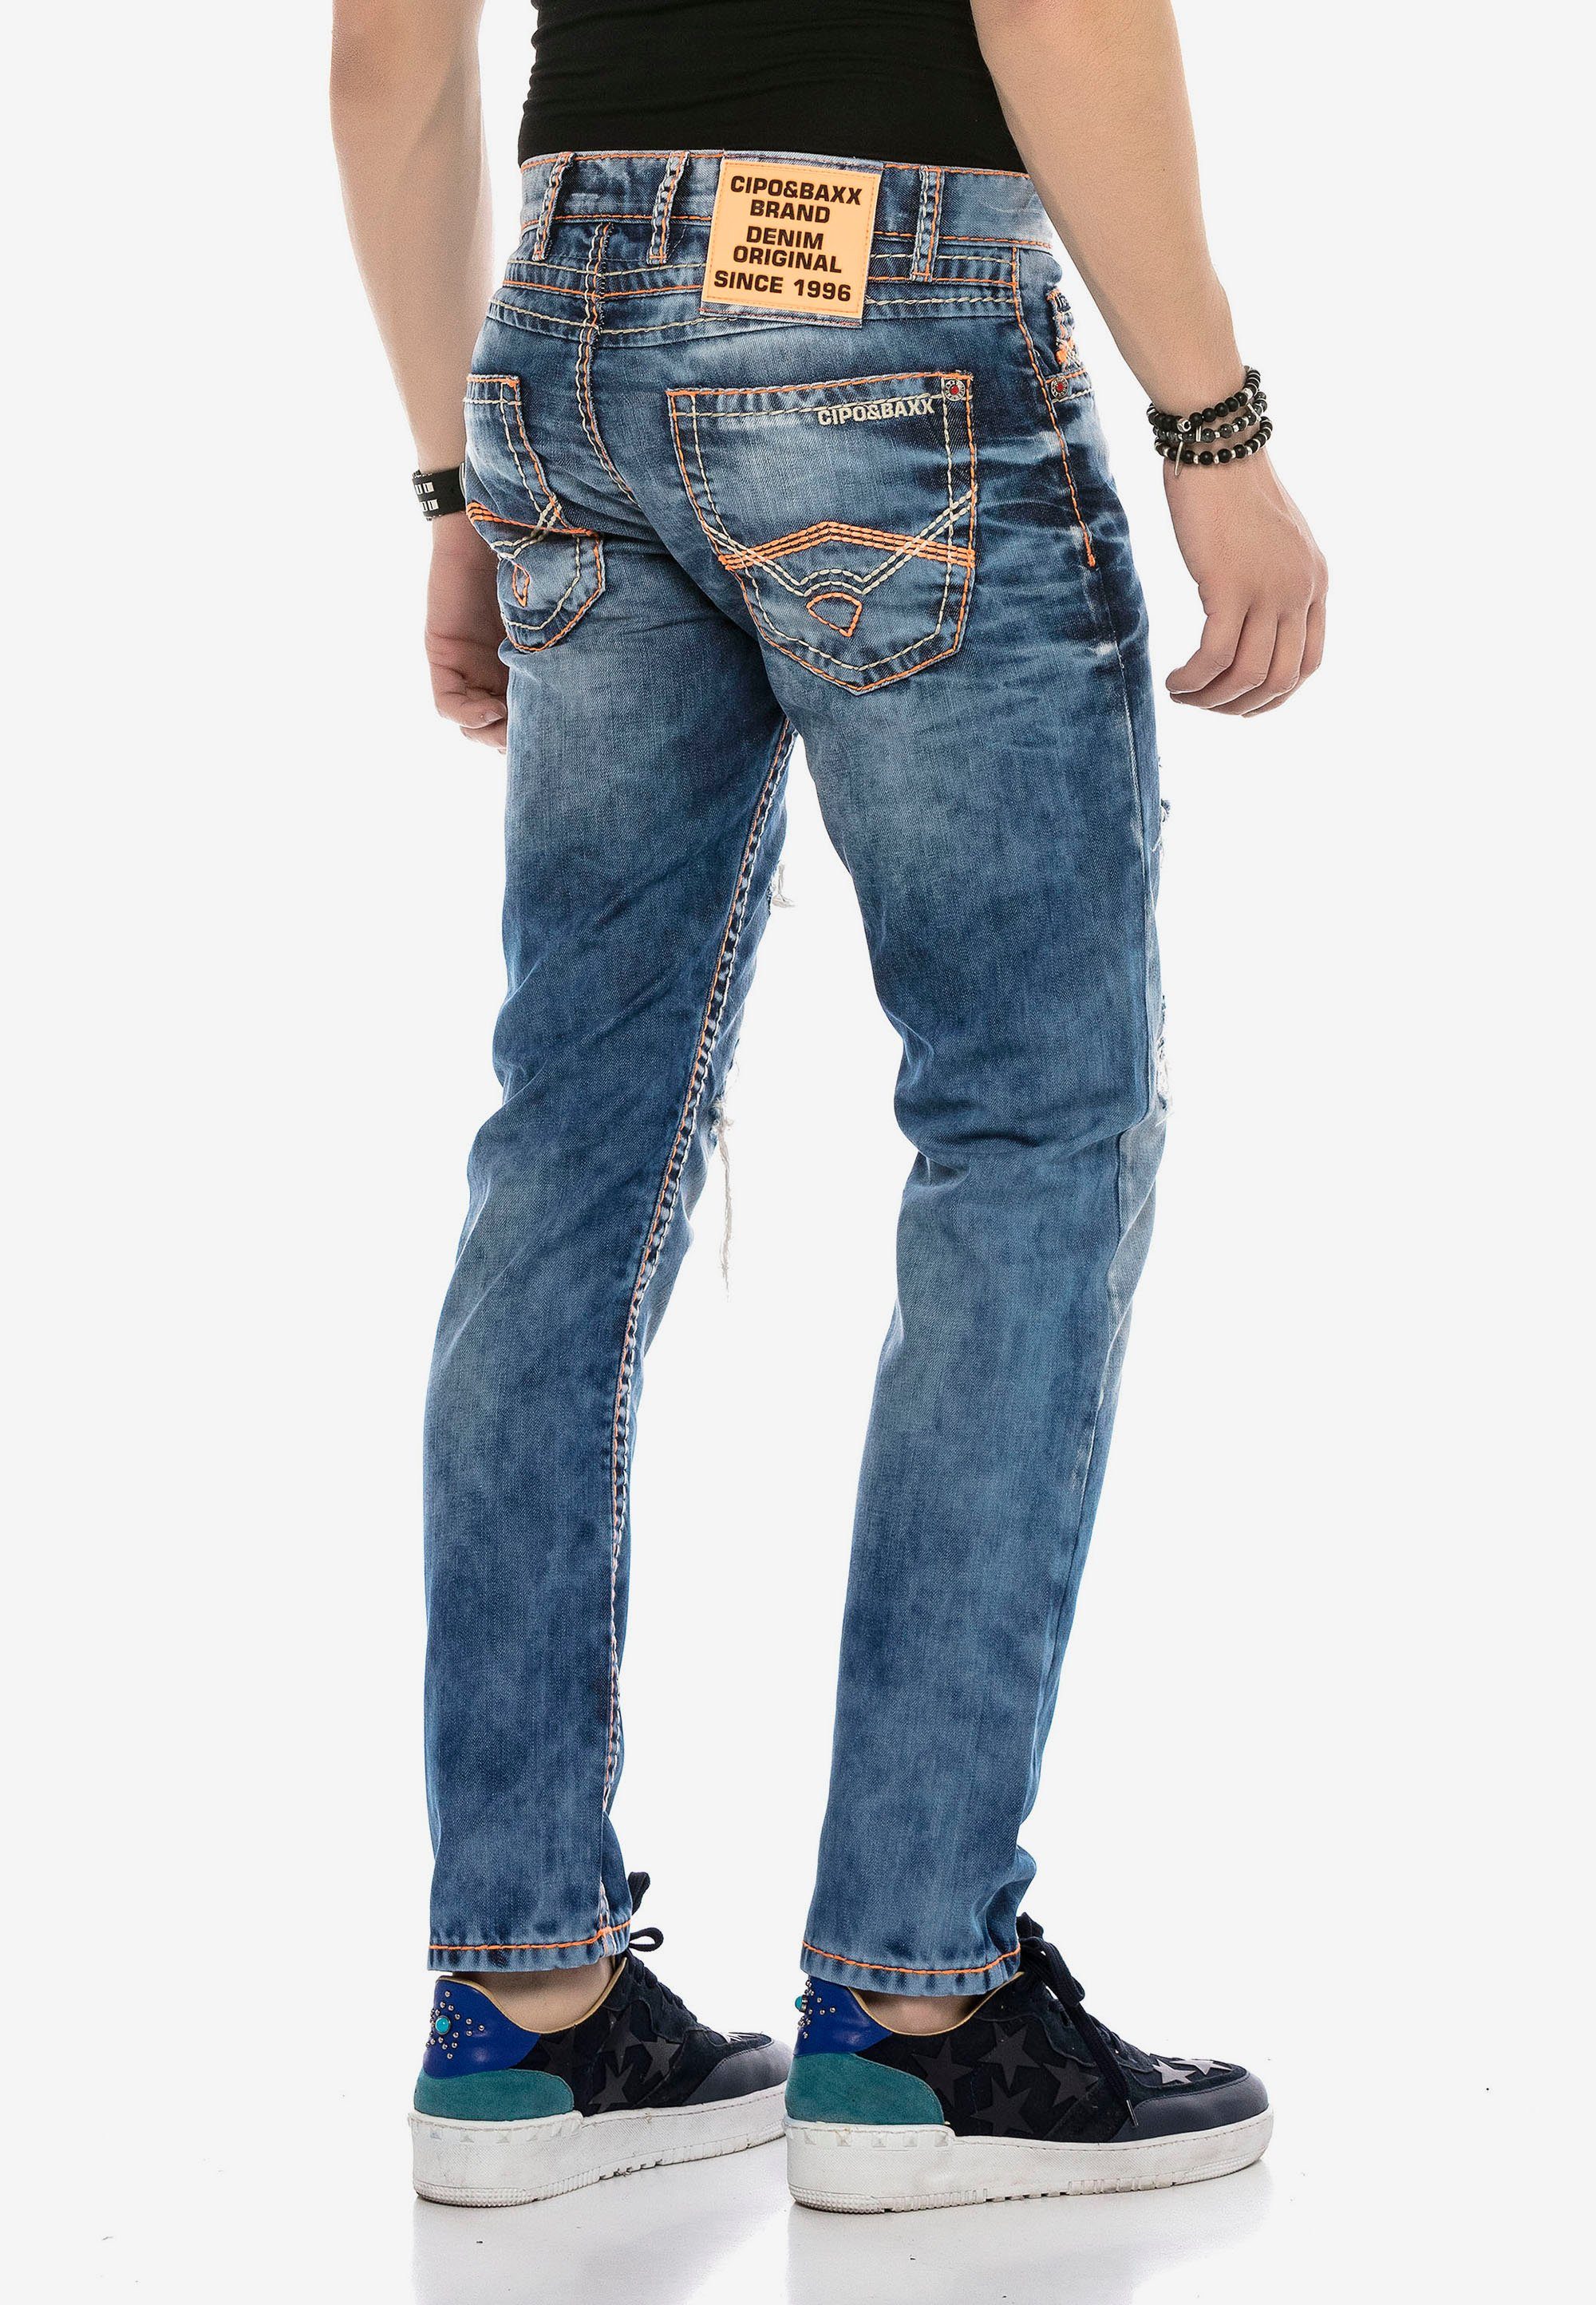 Jeans Cipo & Baxx Destroyed-Look im Bequeme